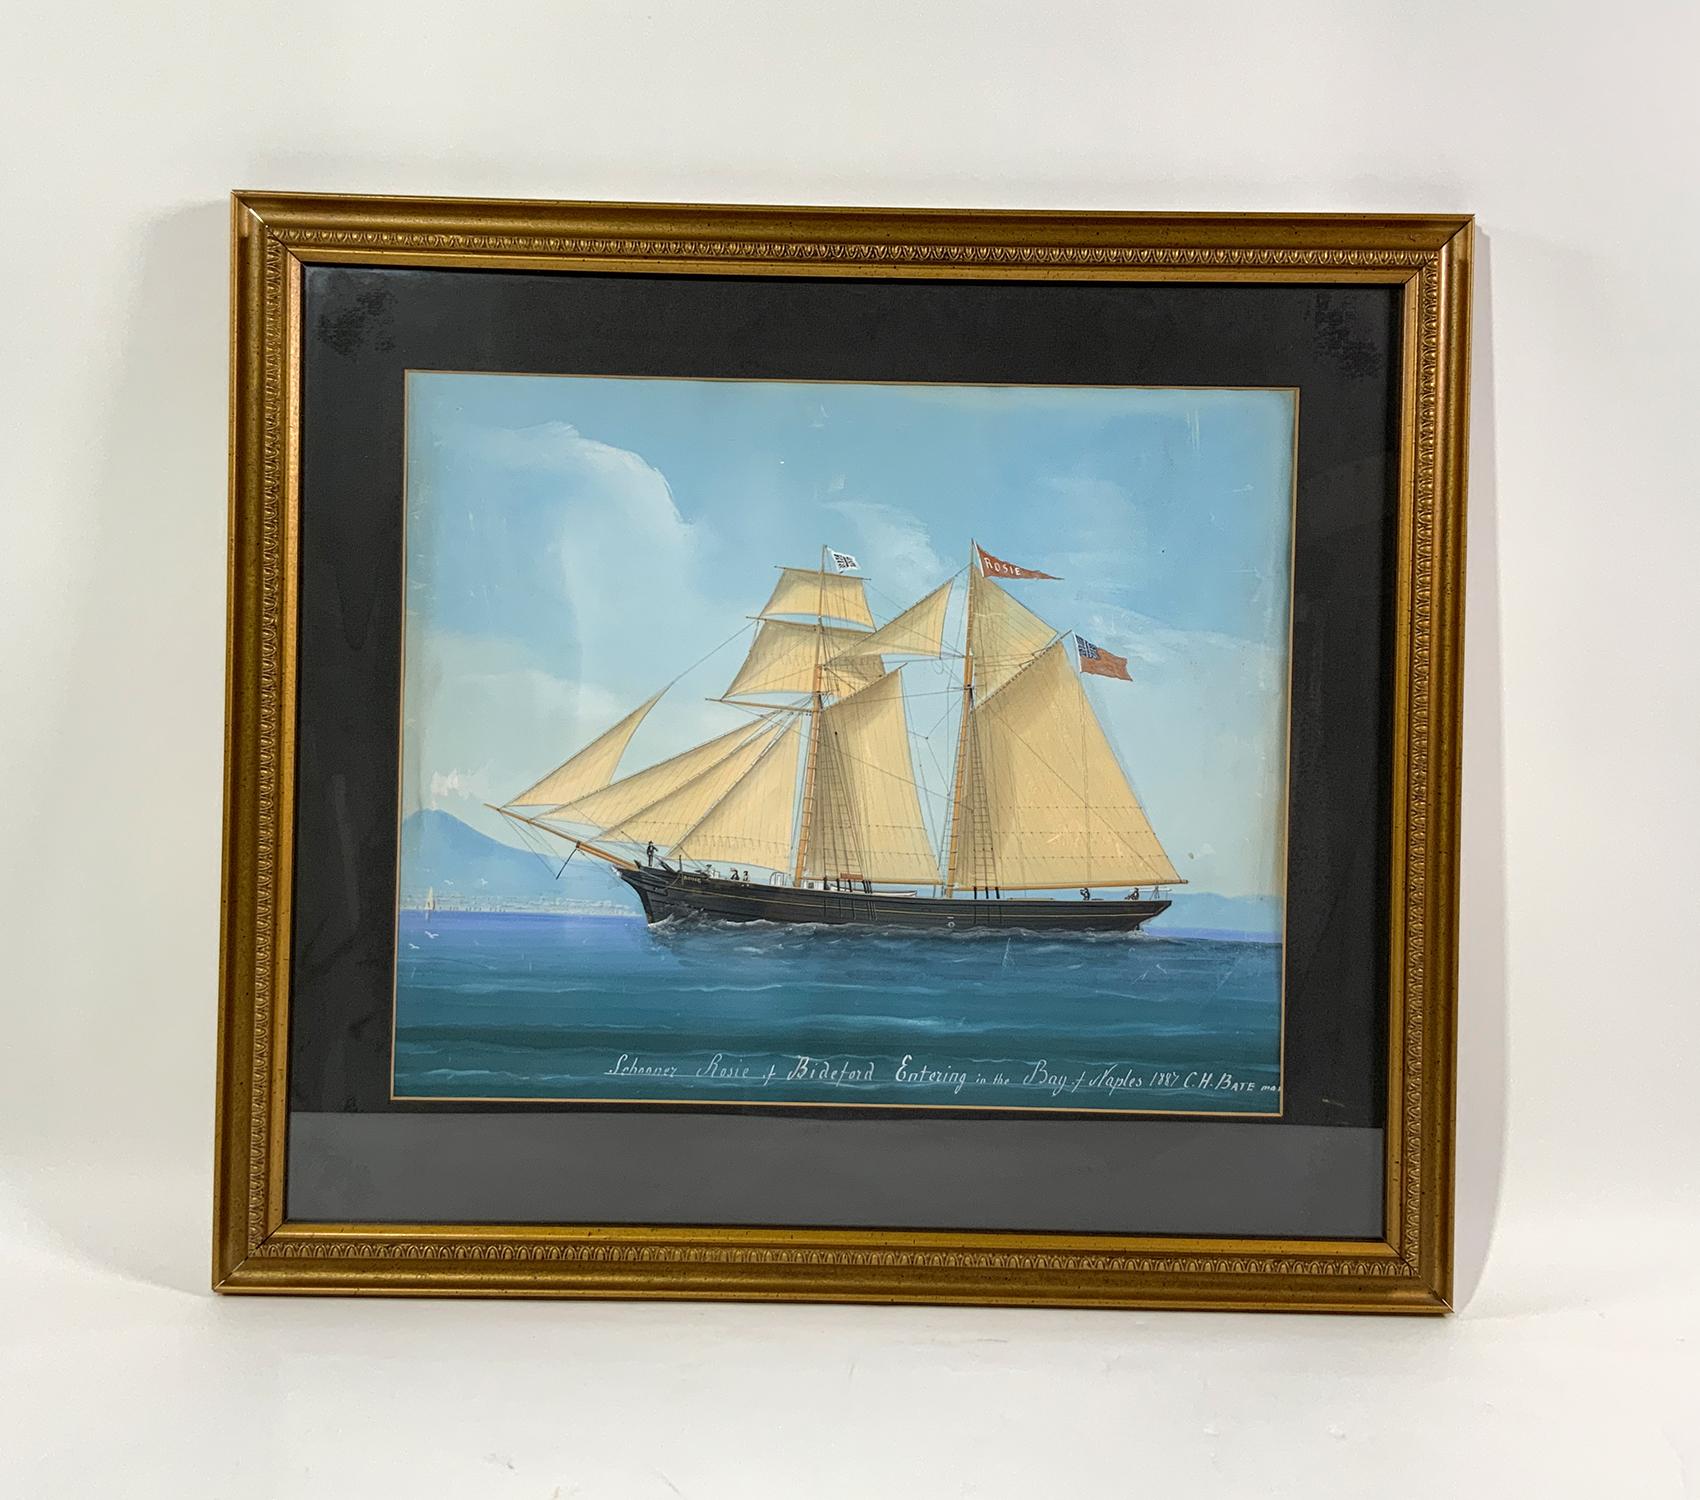 Gouache painting of the Brigantine Rosie of Biddeford in the Bay of Naples in 1887. C.H. Bate, Master. Finely detailed work with trimmed sails, standing and running cords, crew on deck, one with binoculars, a bow lookout and captain at the helm.